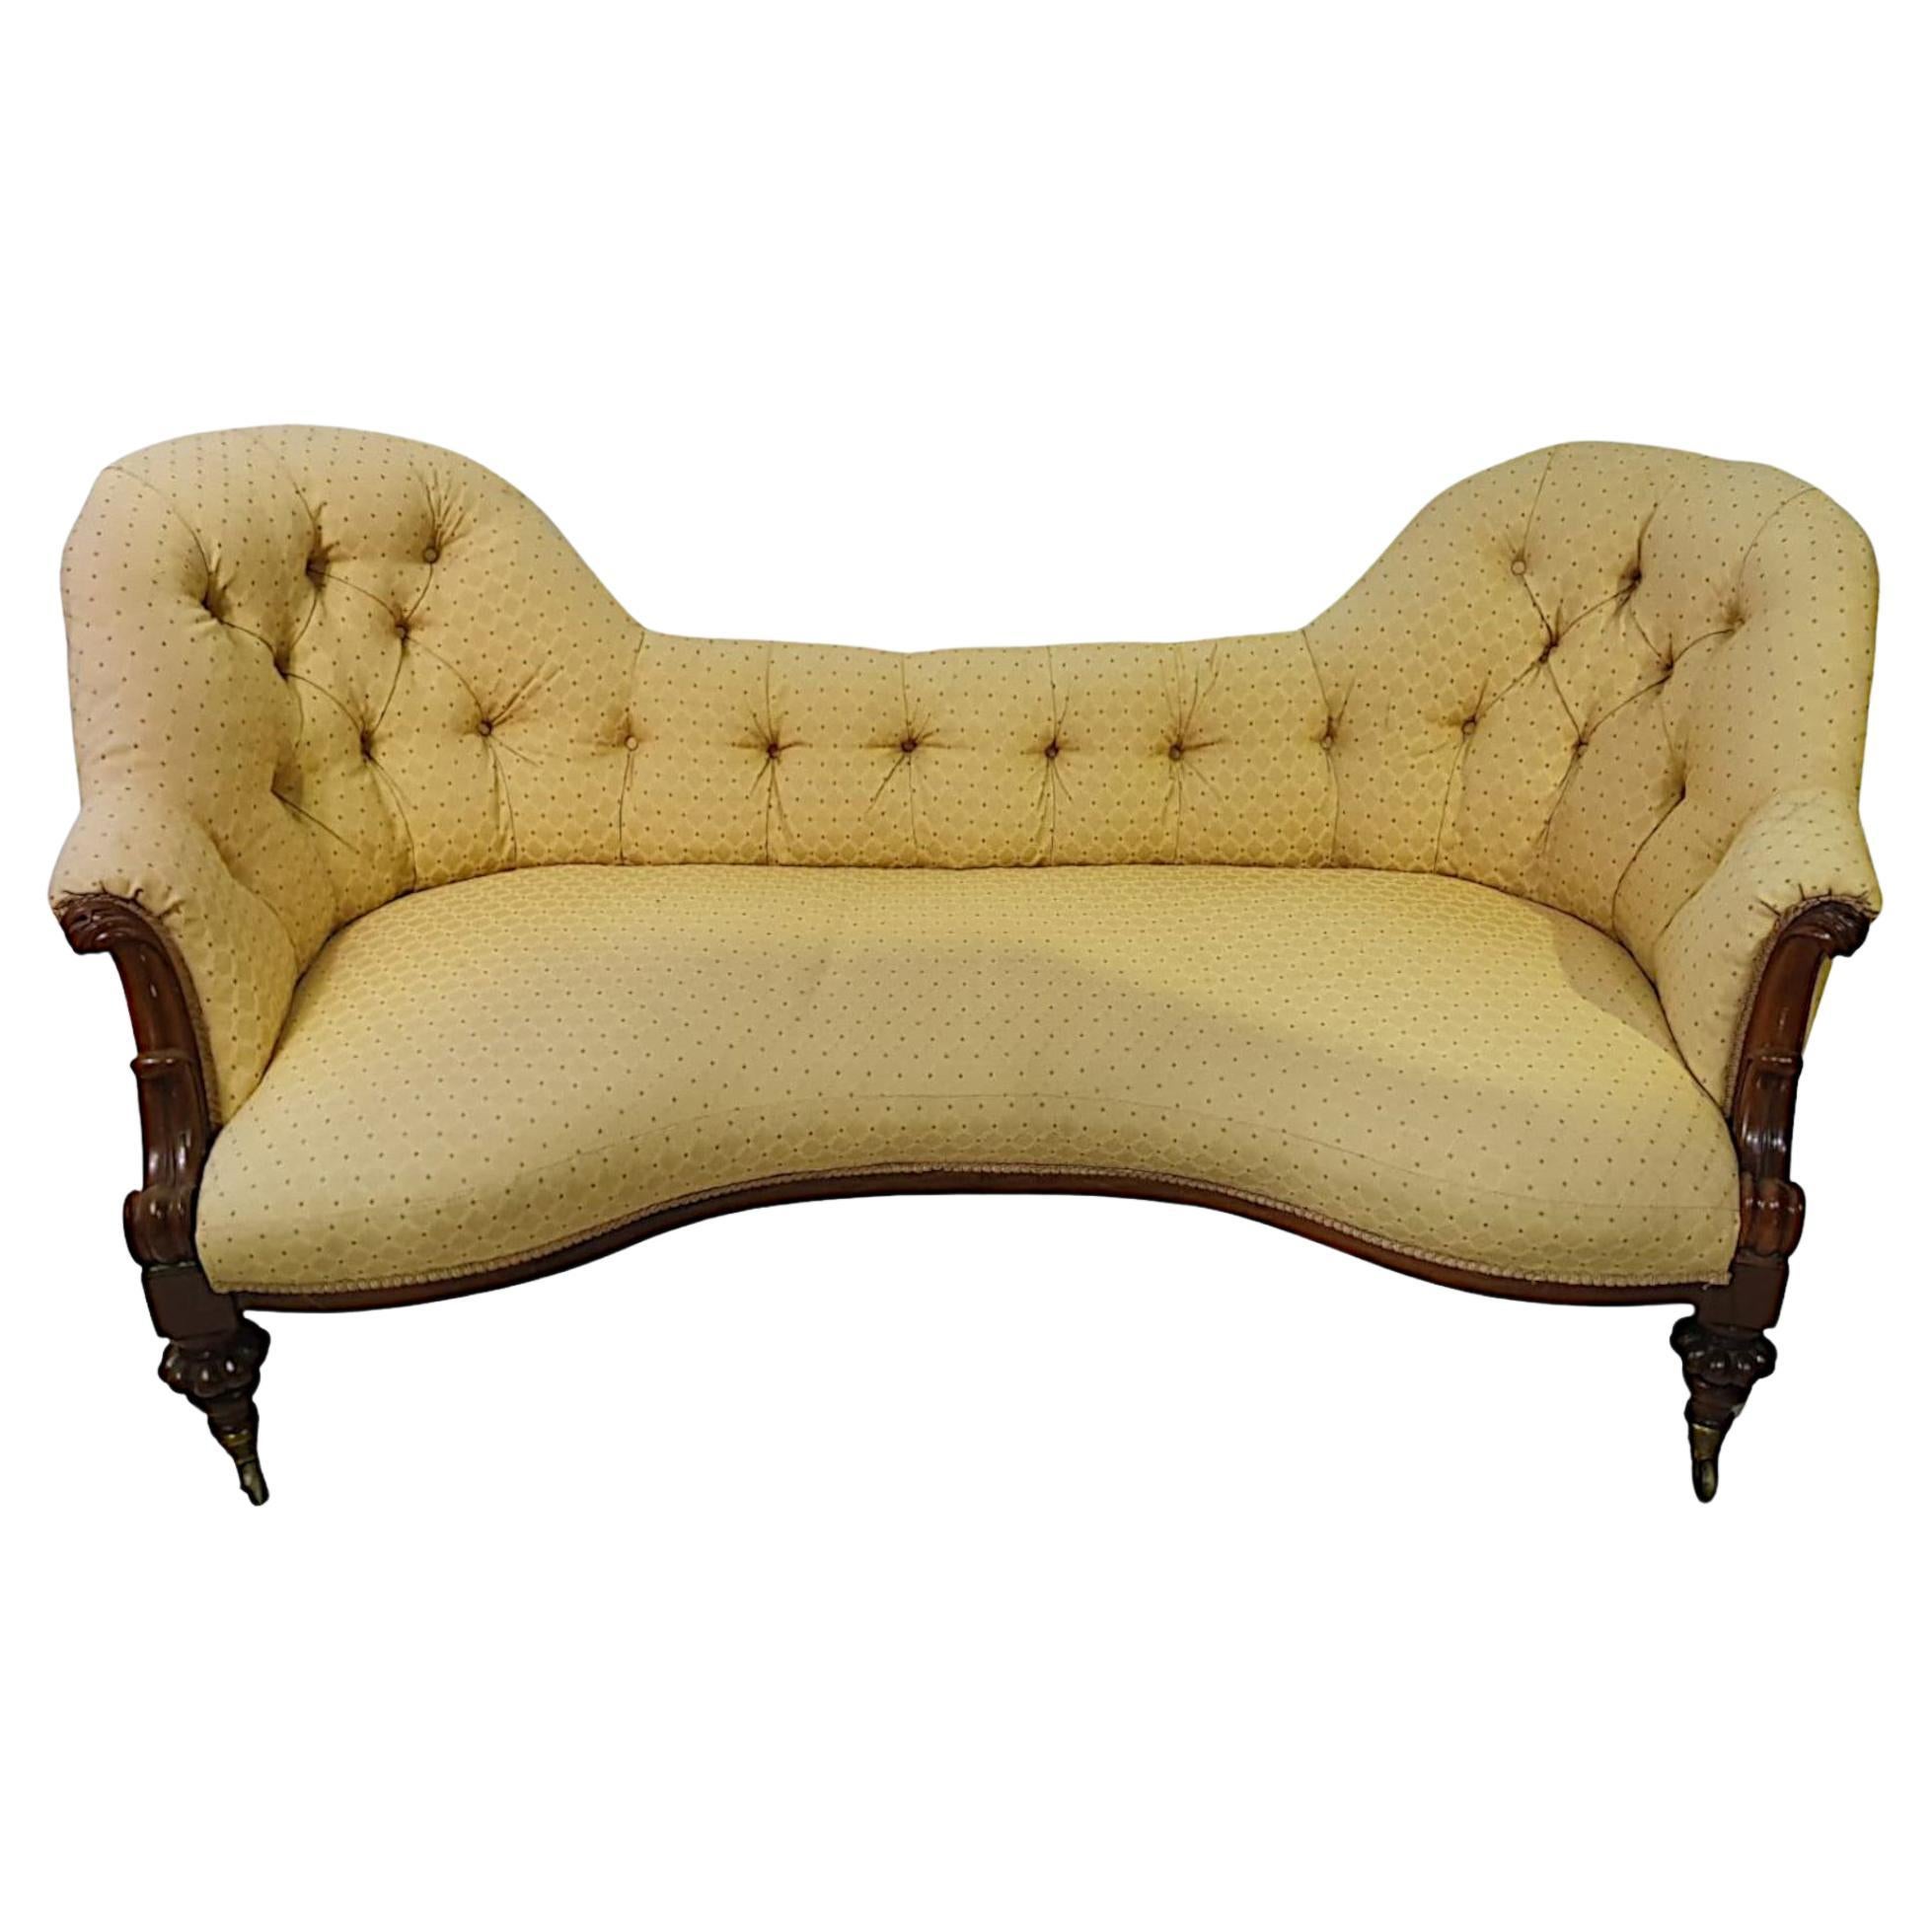 Gorgeous 19th Century Humpback Settee For Sale